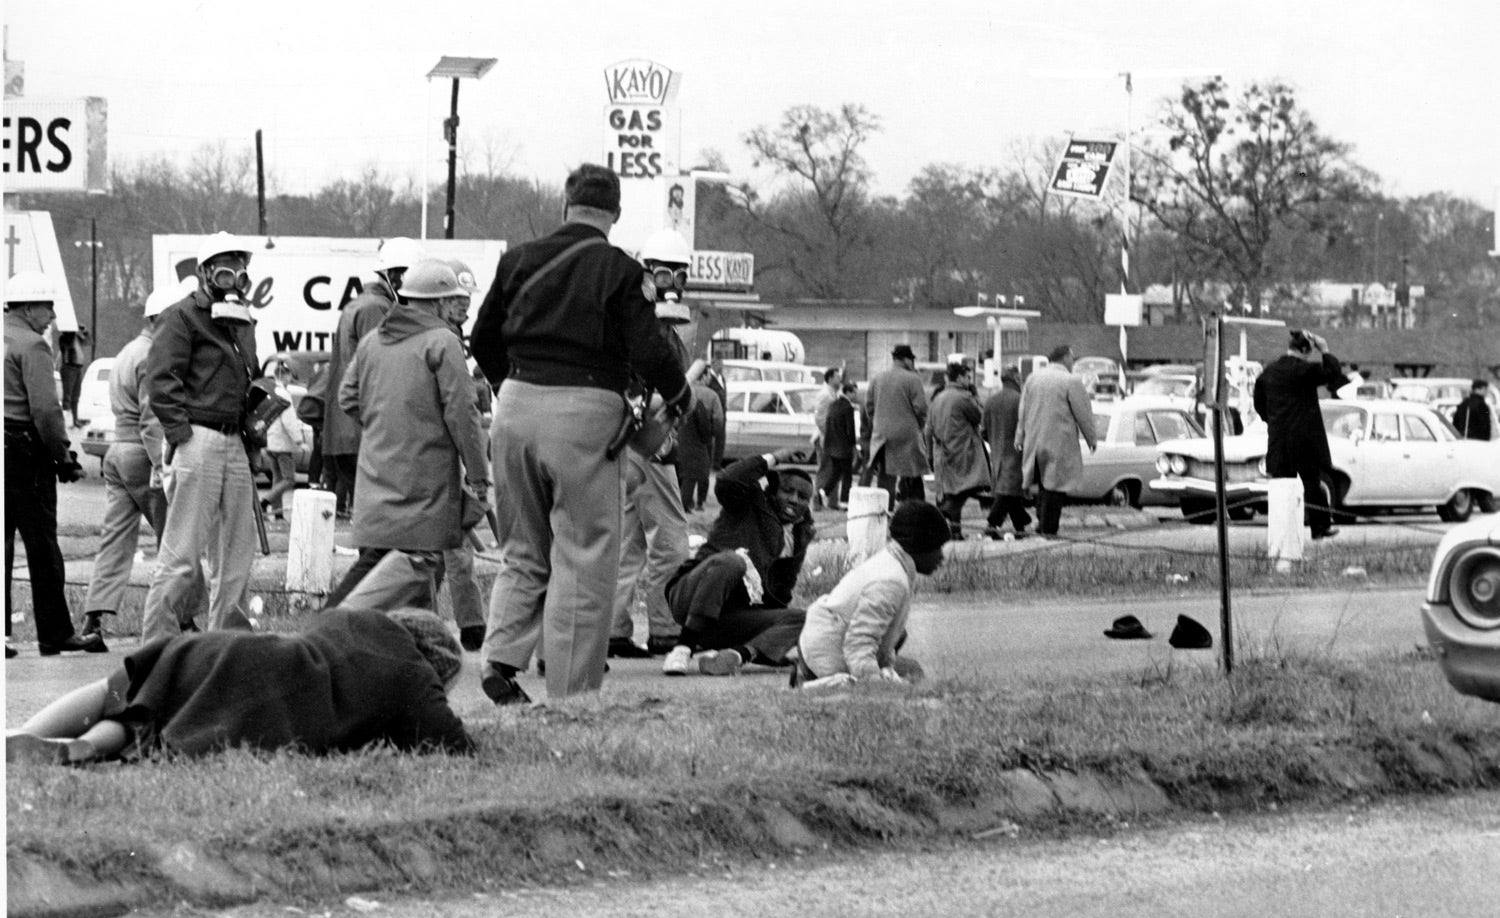 21 Notable Moments of Social Unrest That Shaped Black History
